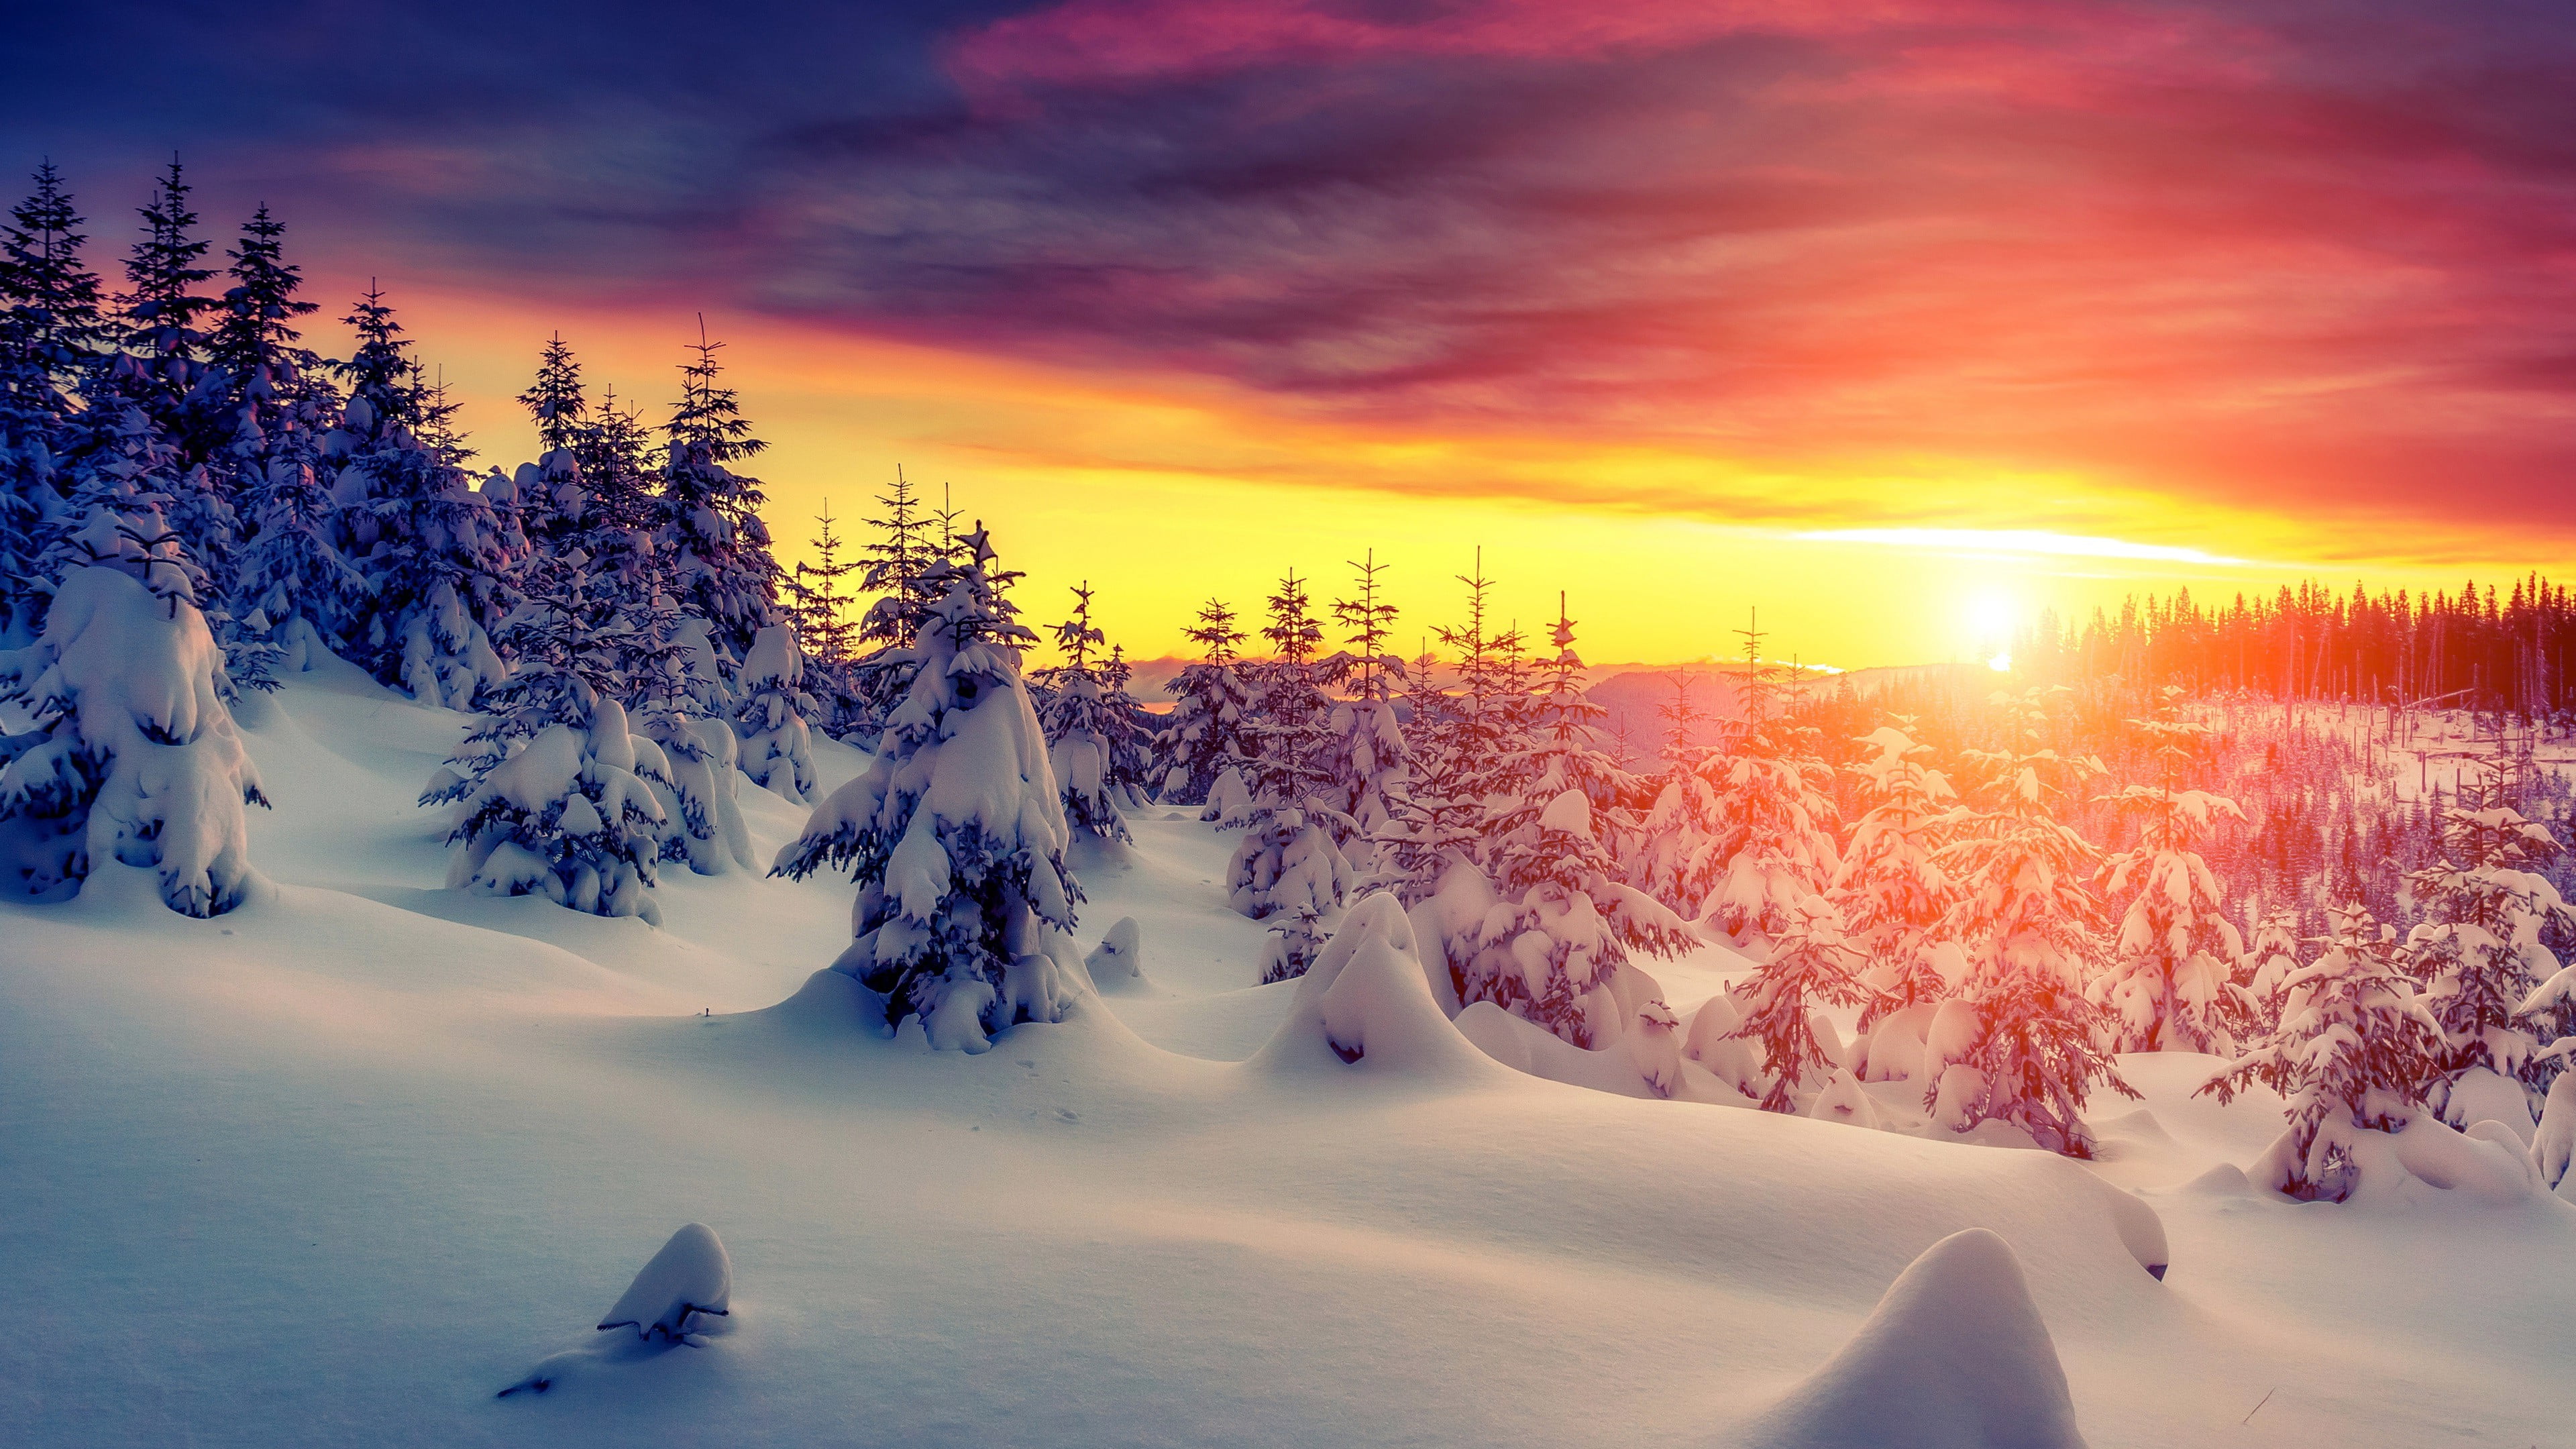 green pine trees, landscape, snow, sunset, cold temperature, winter